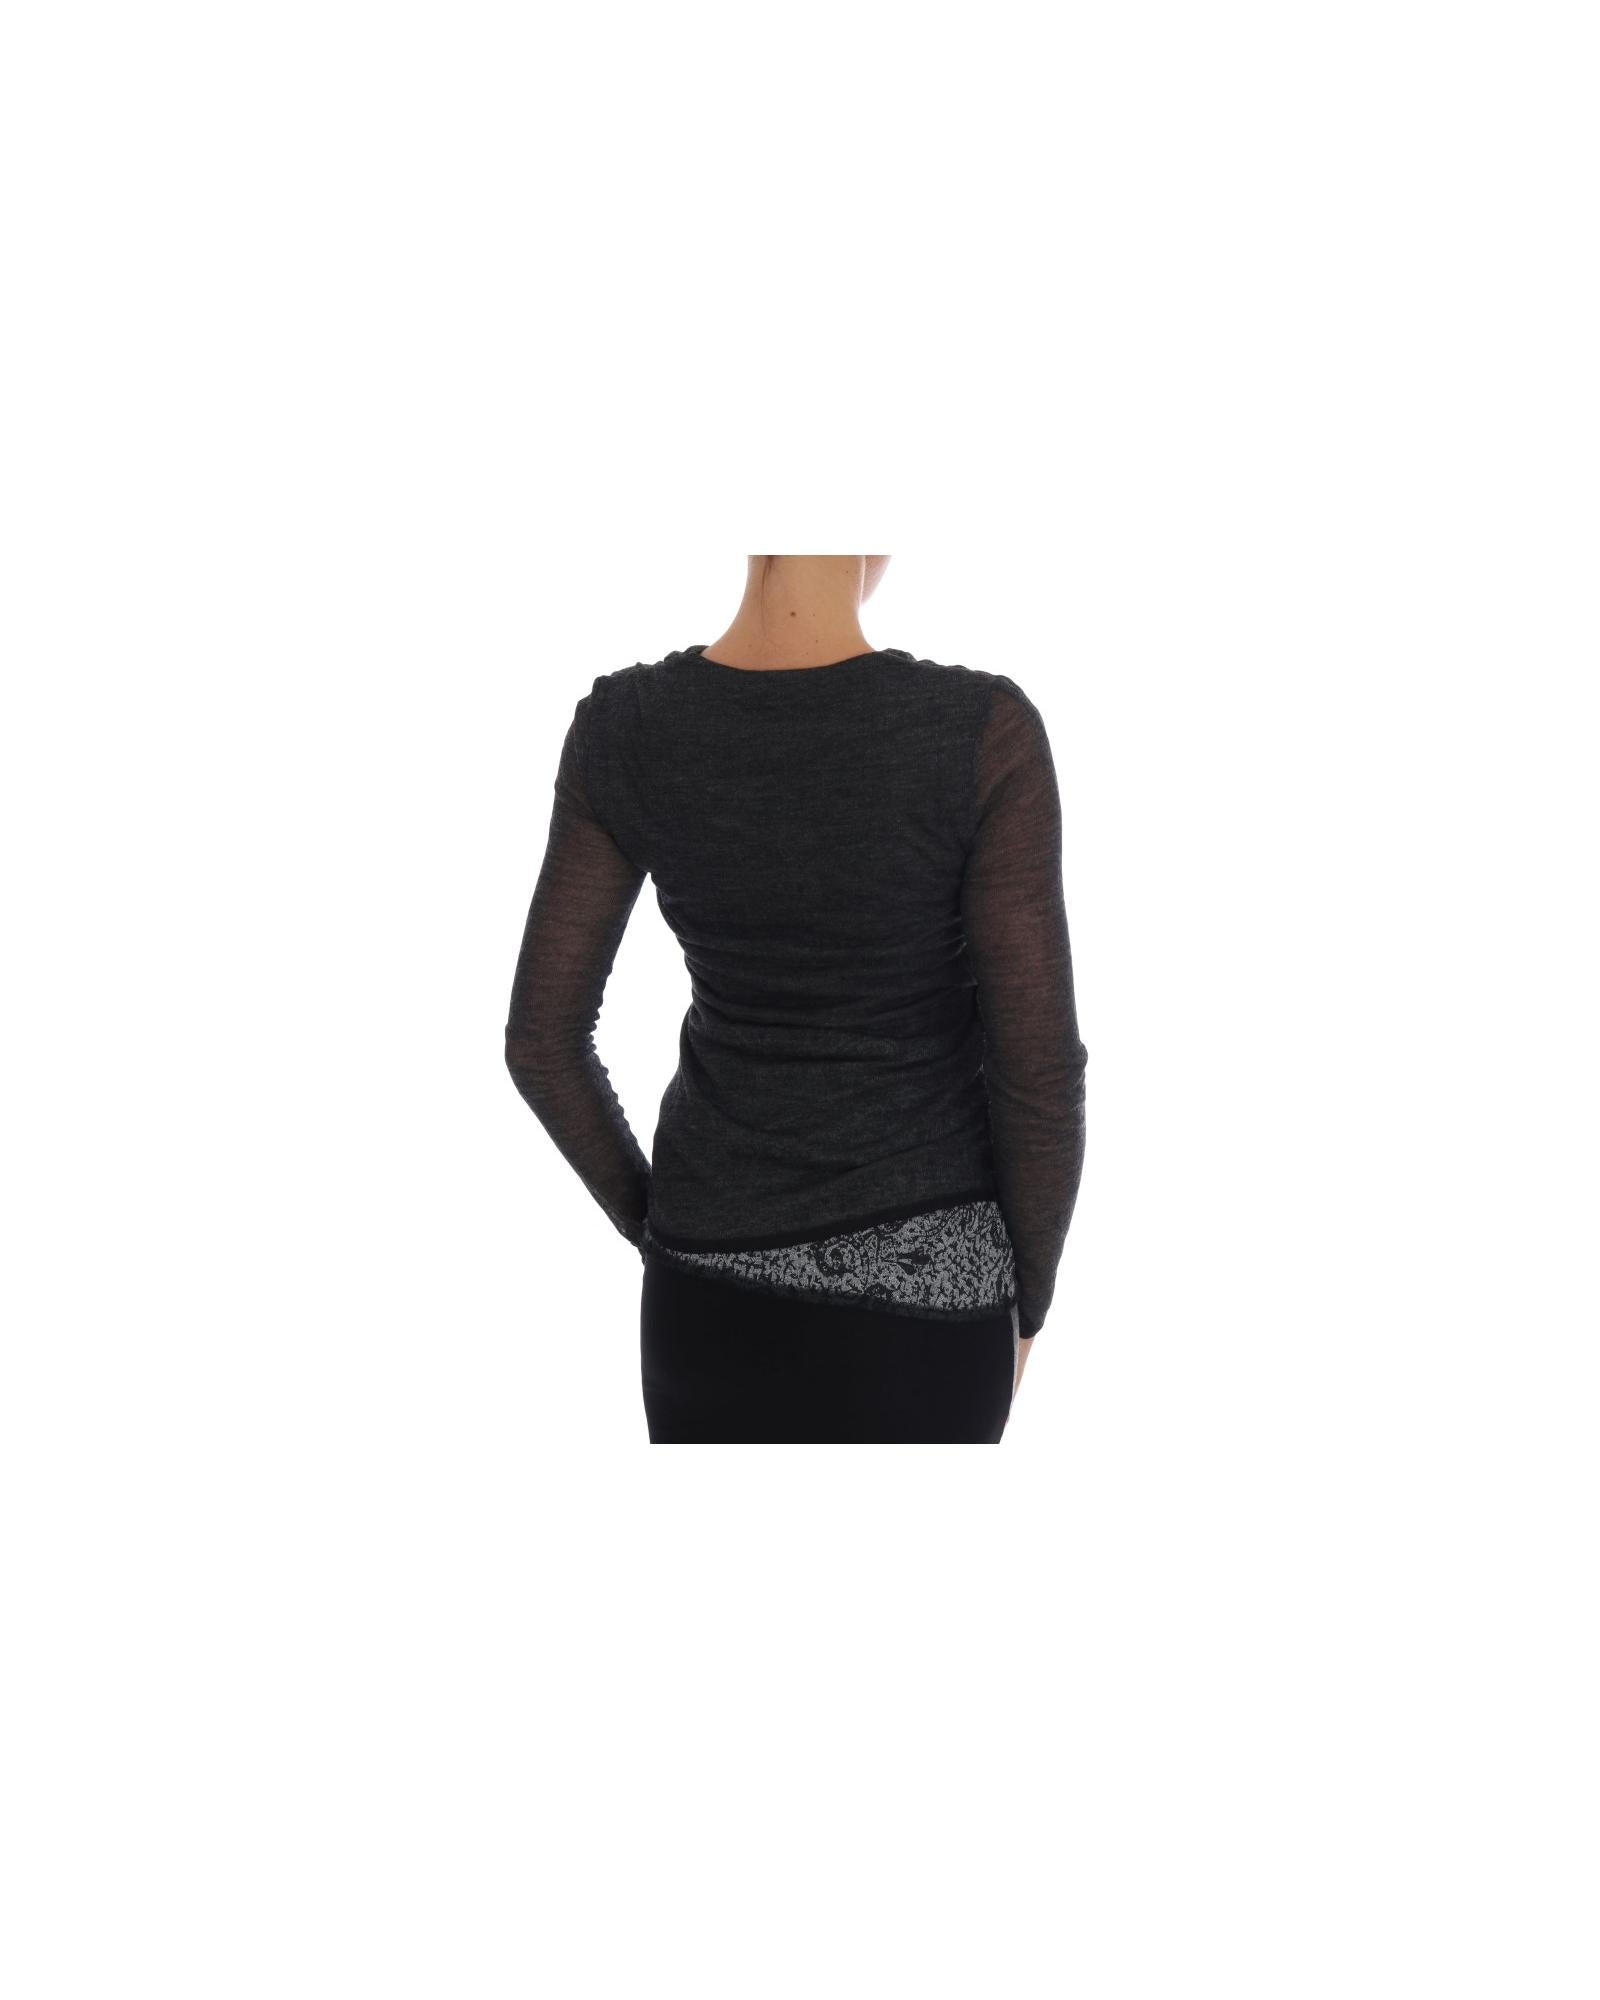 Authentic Ermanno Scervino Long Sleeve Top with Lace Application 44 IT Women